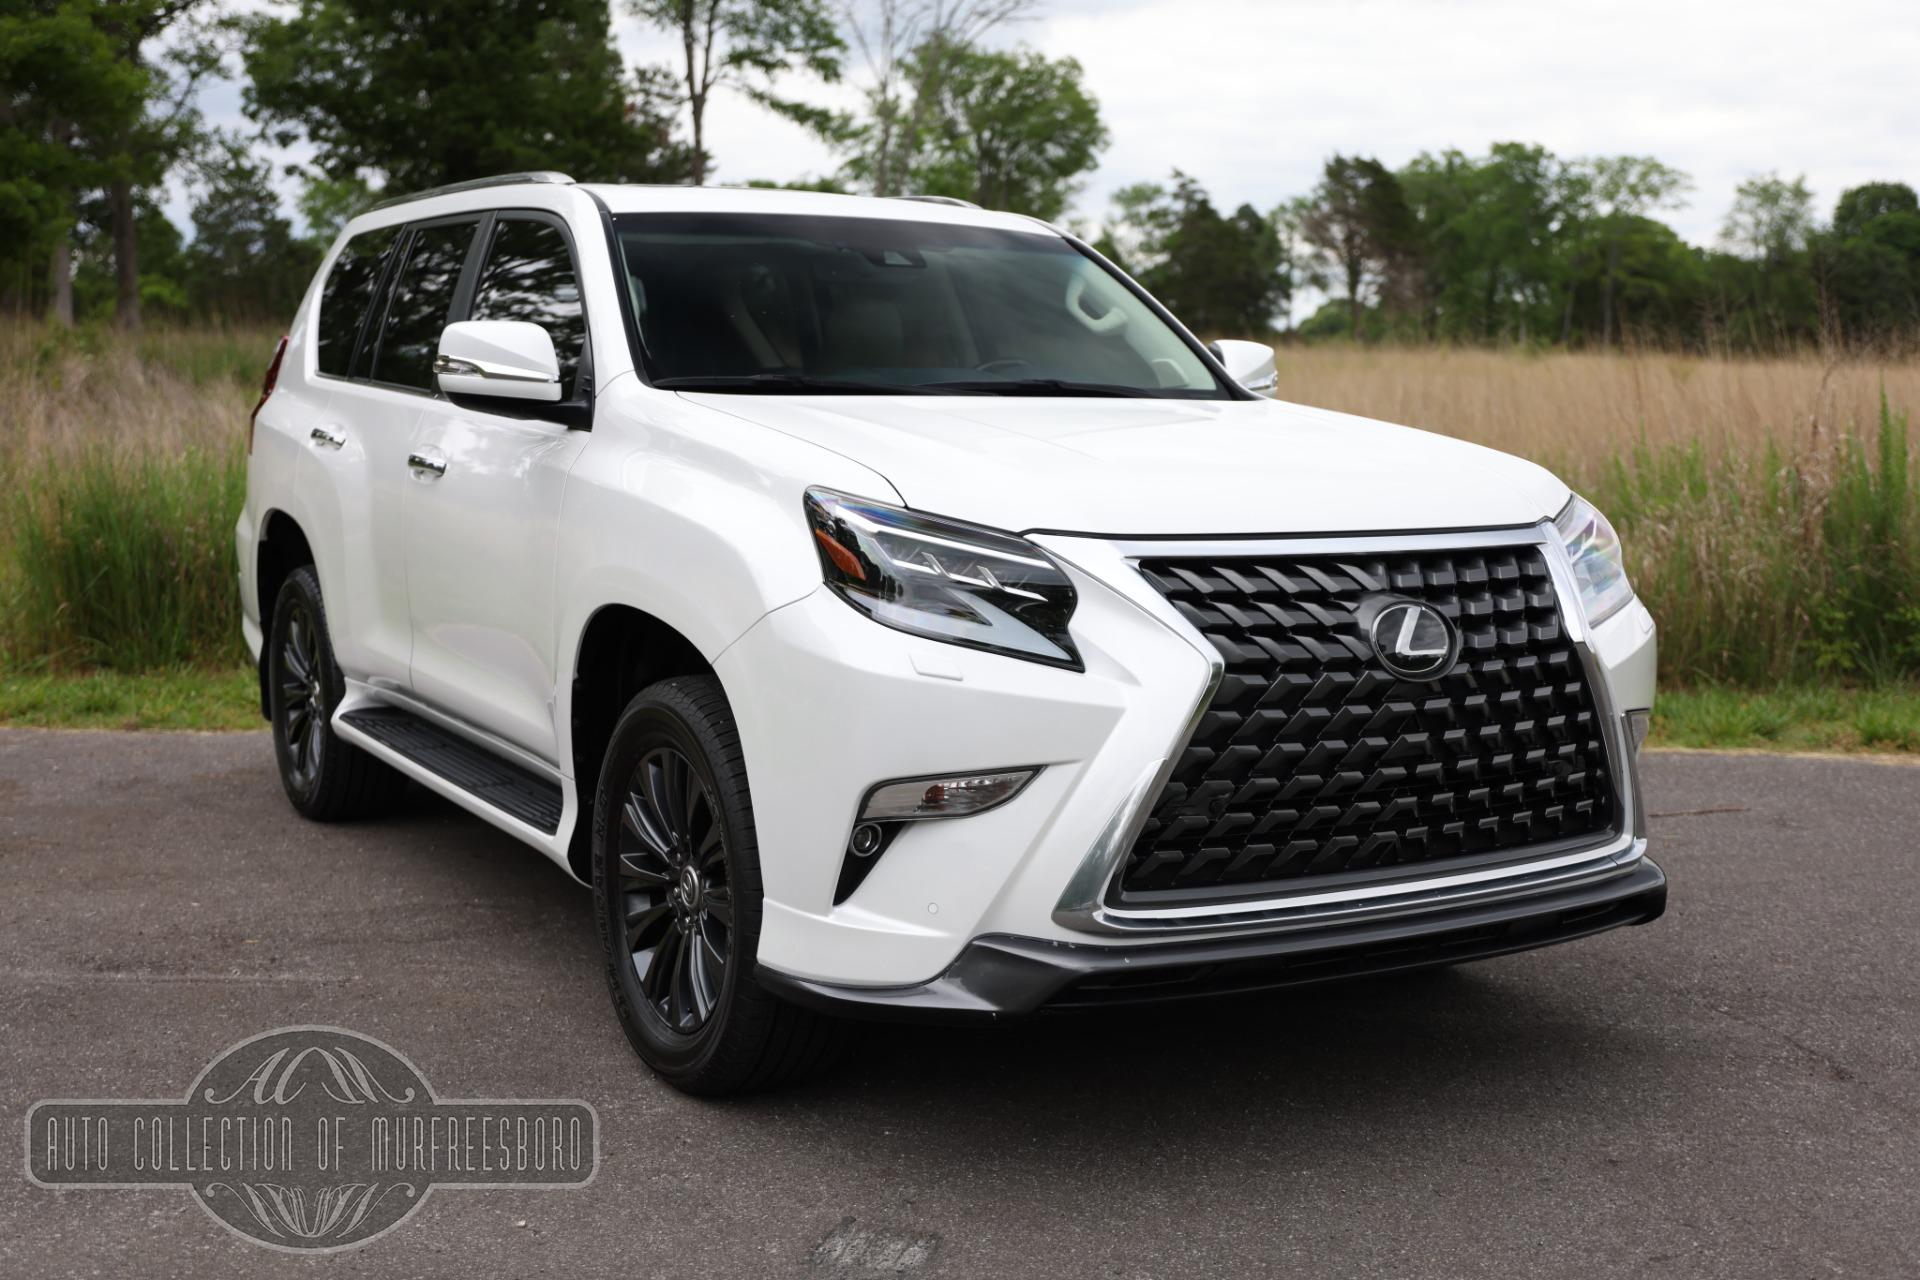 Used 2020 Lexus GX 460 AWD PREMIUM SPORT DESIGN PACKAGE for sale $47,700 at Auto Collection in Murfreesboro TN 37129 1